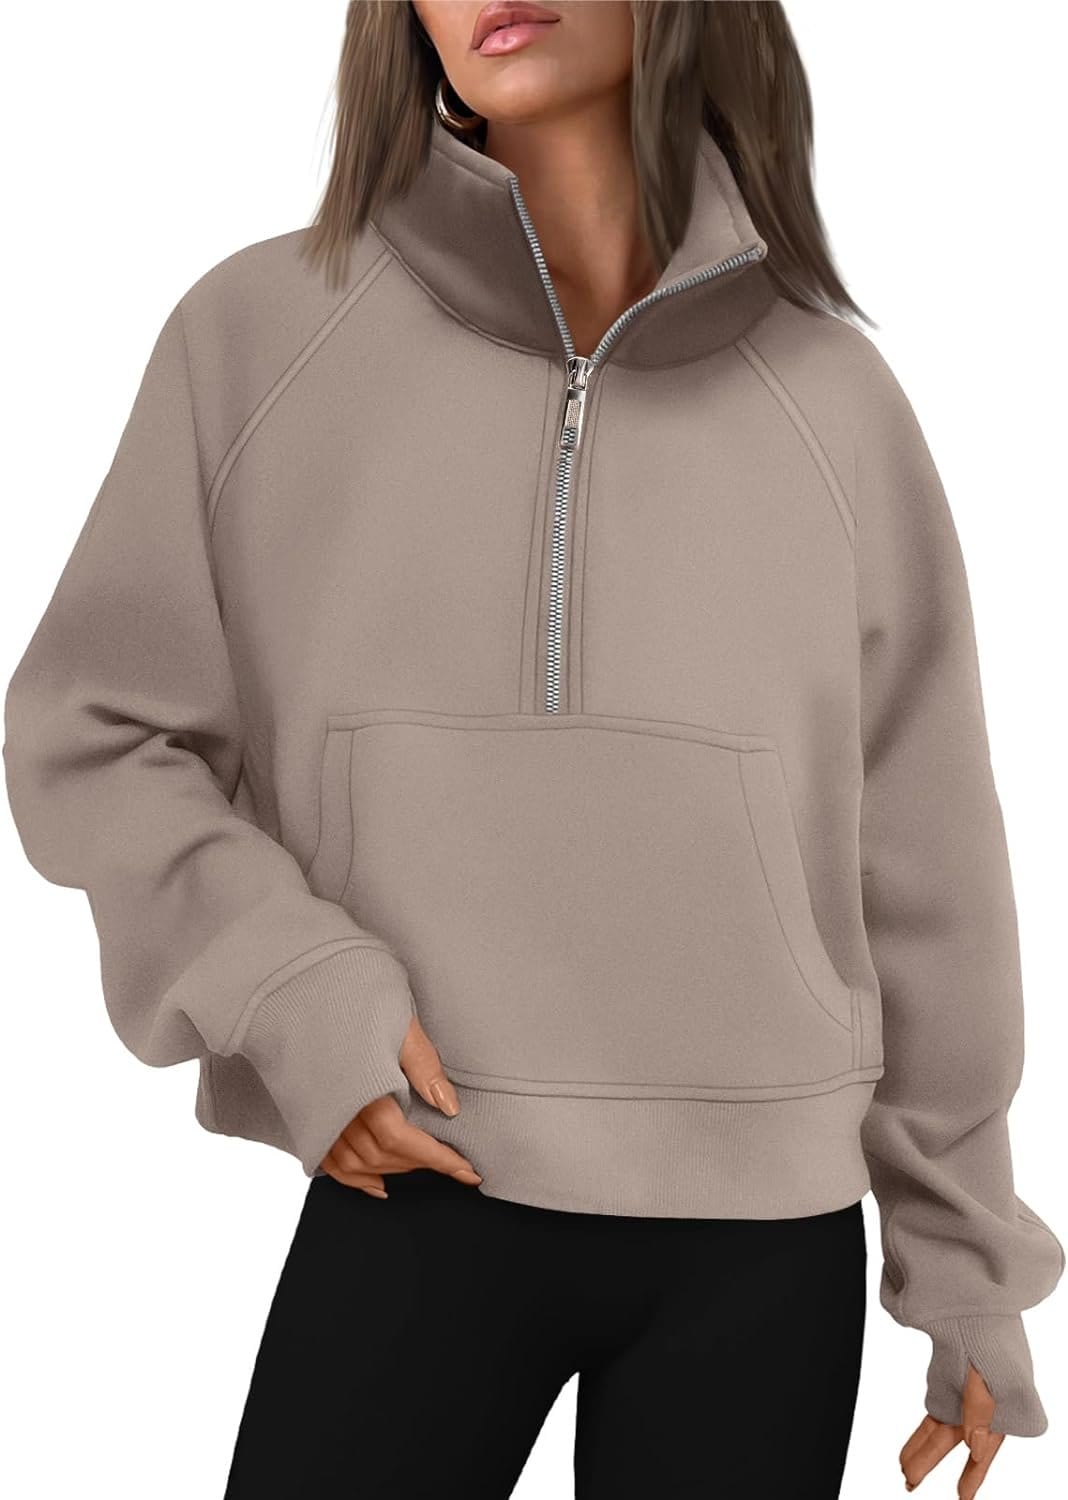 You are currently viewing AUTOMET Womens Sweatshirts Review